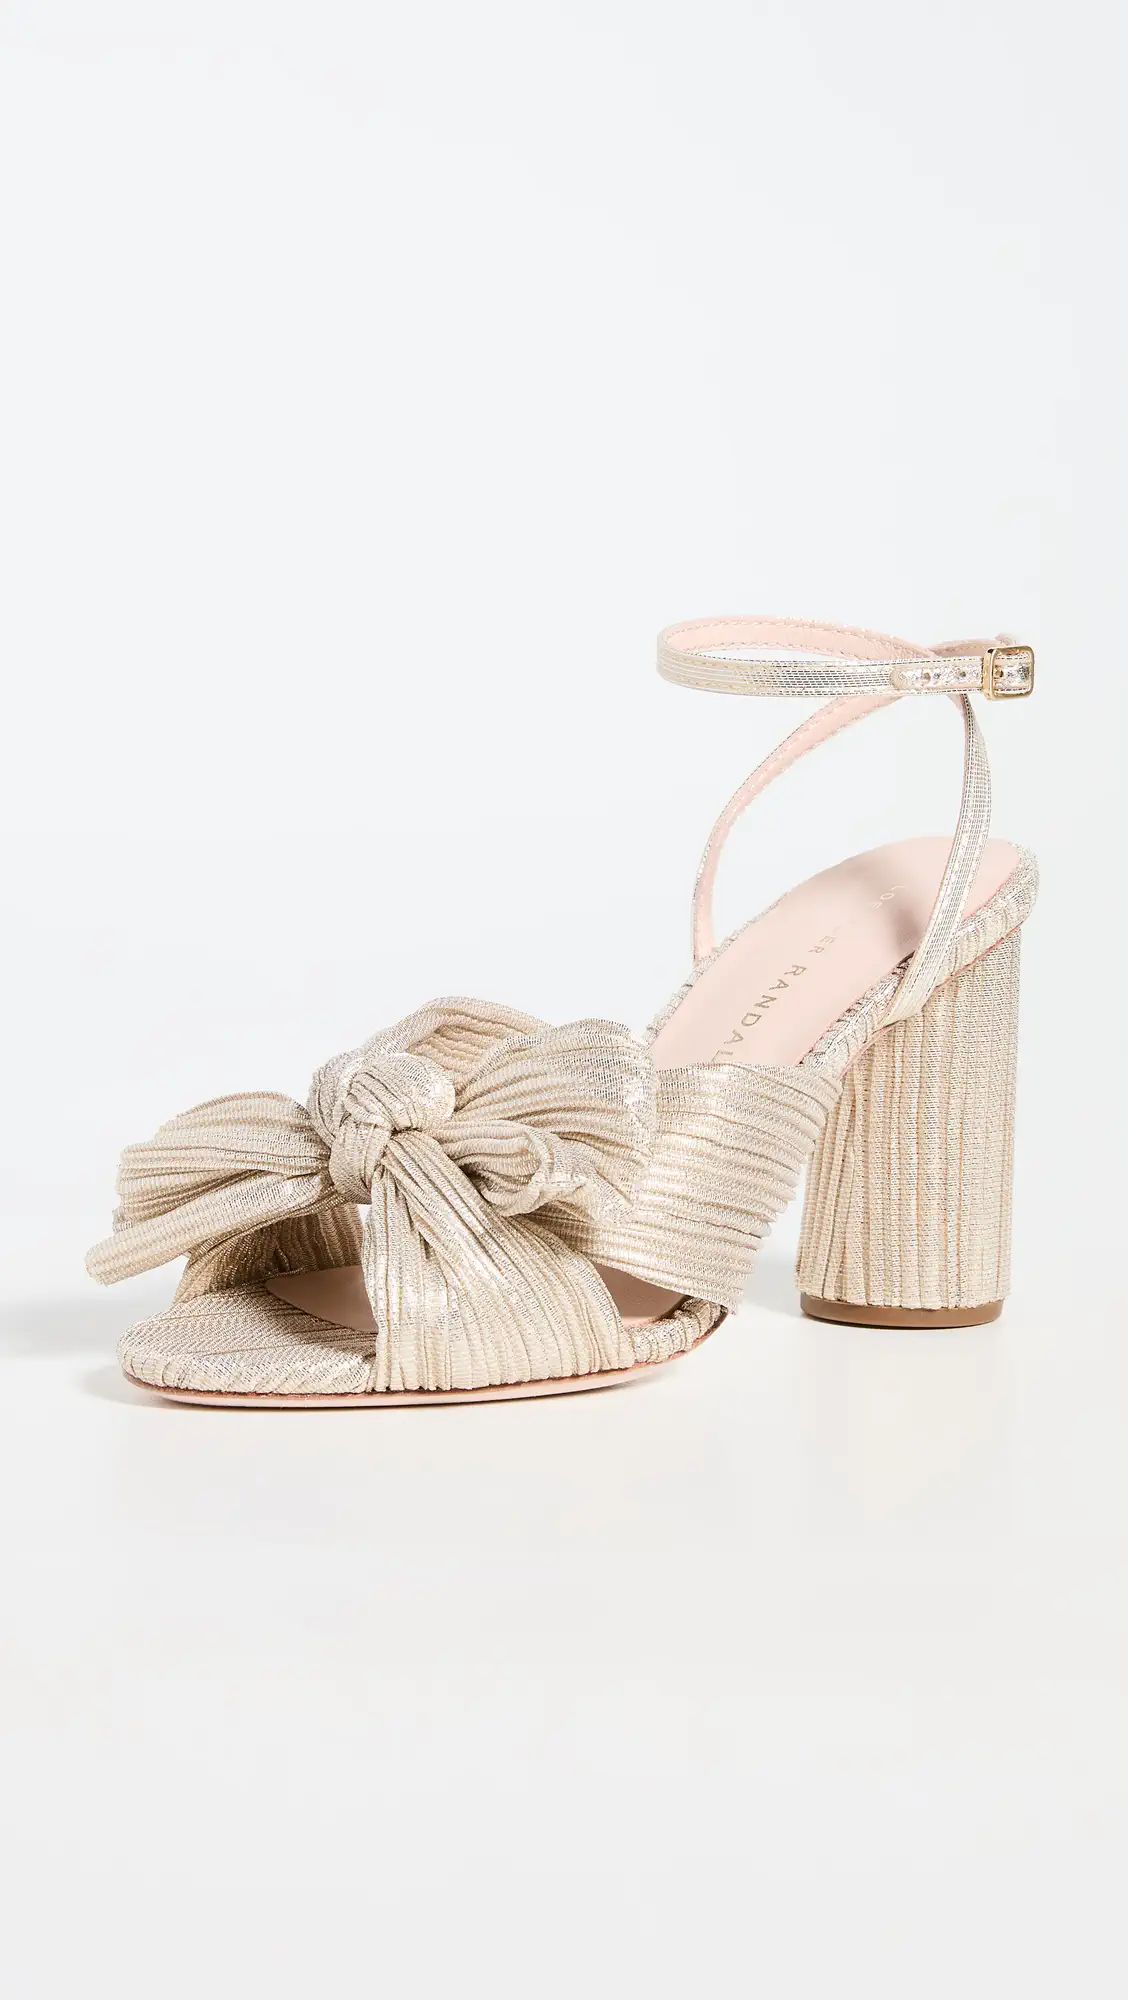 Loeffler Randall Camellia Knot Mules with Ankle Strap | Shopbop | Shopbop